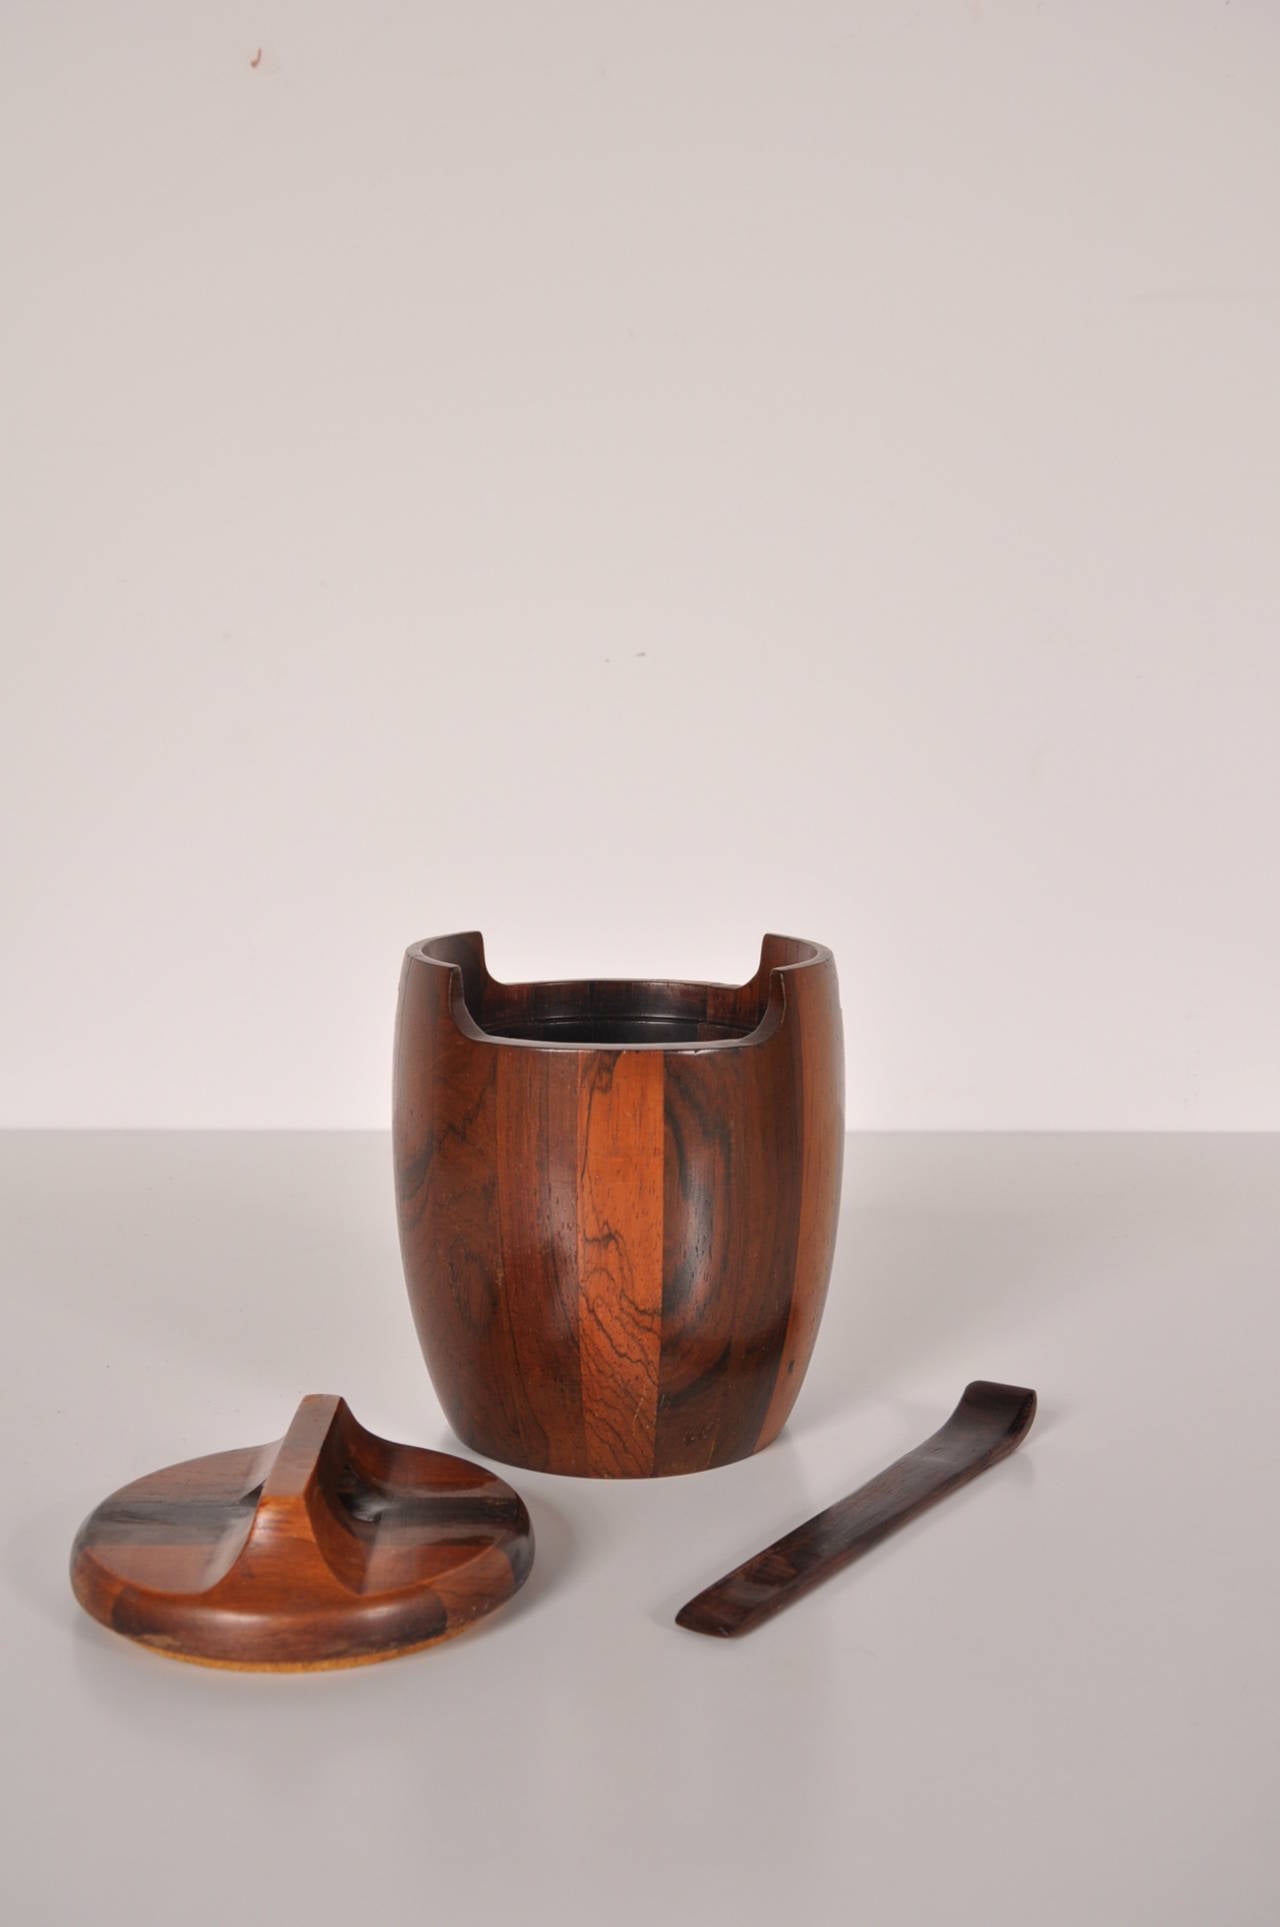 Rosewood Tabacco Pot with Original Spoon by Jean Gillon, circa 1960